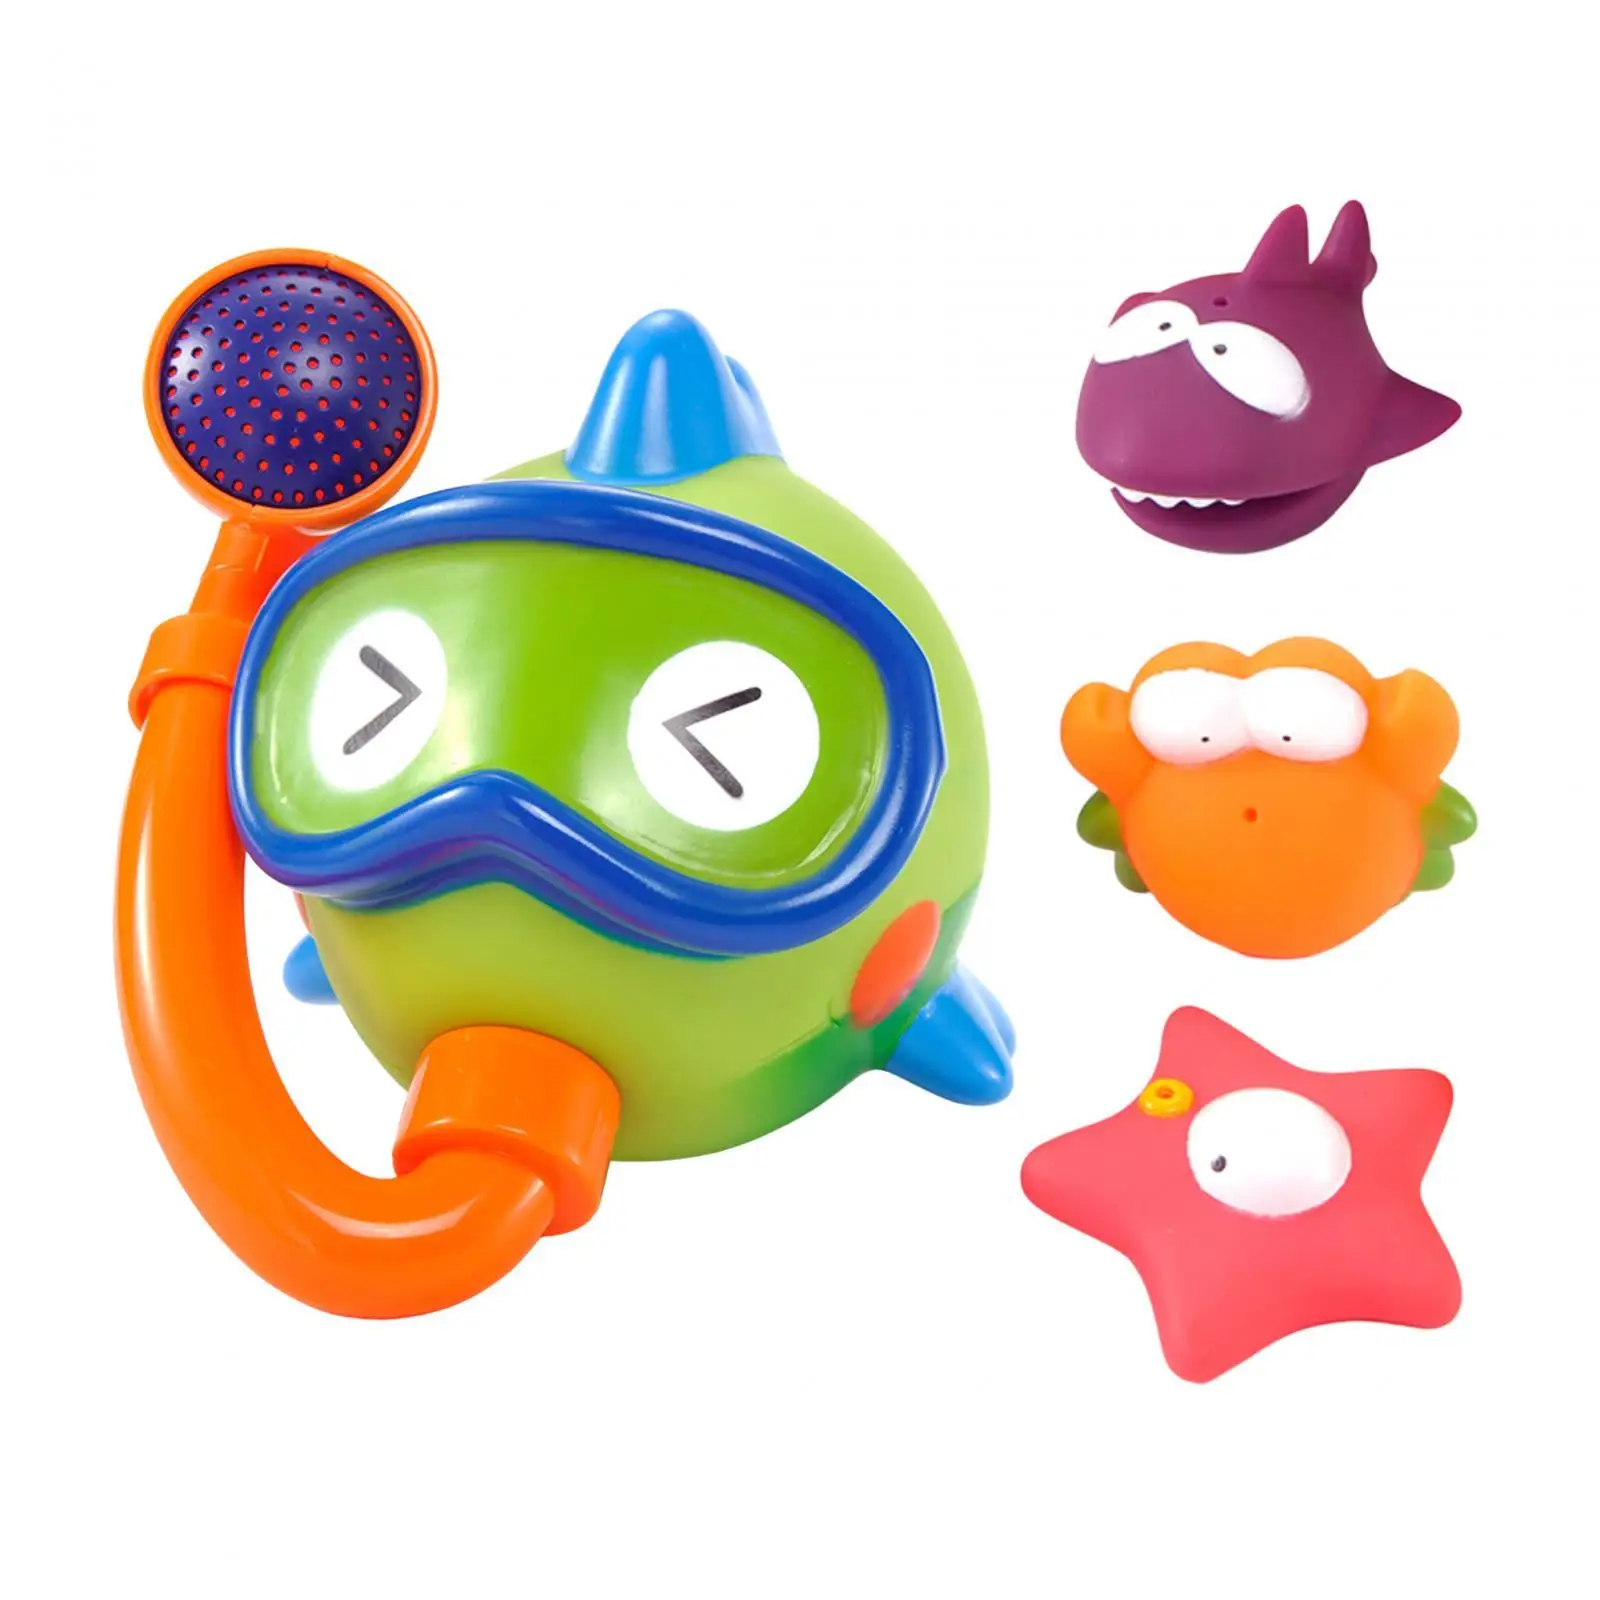 4 Pieces Toddlers Bath Shower Toys Bath Tub Toys Ocean Sea Animal Bathtub Toys for Toddlers Girls Boys Baby Great Gifts